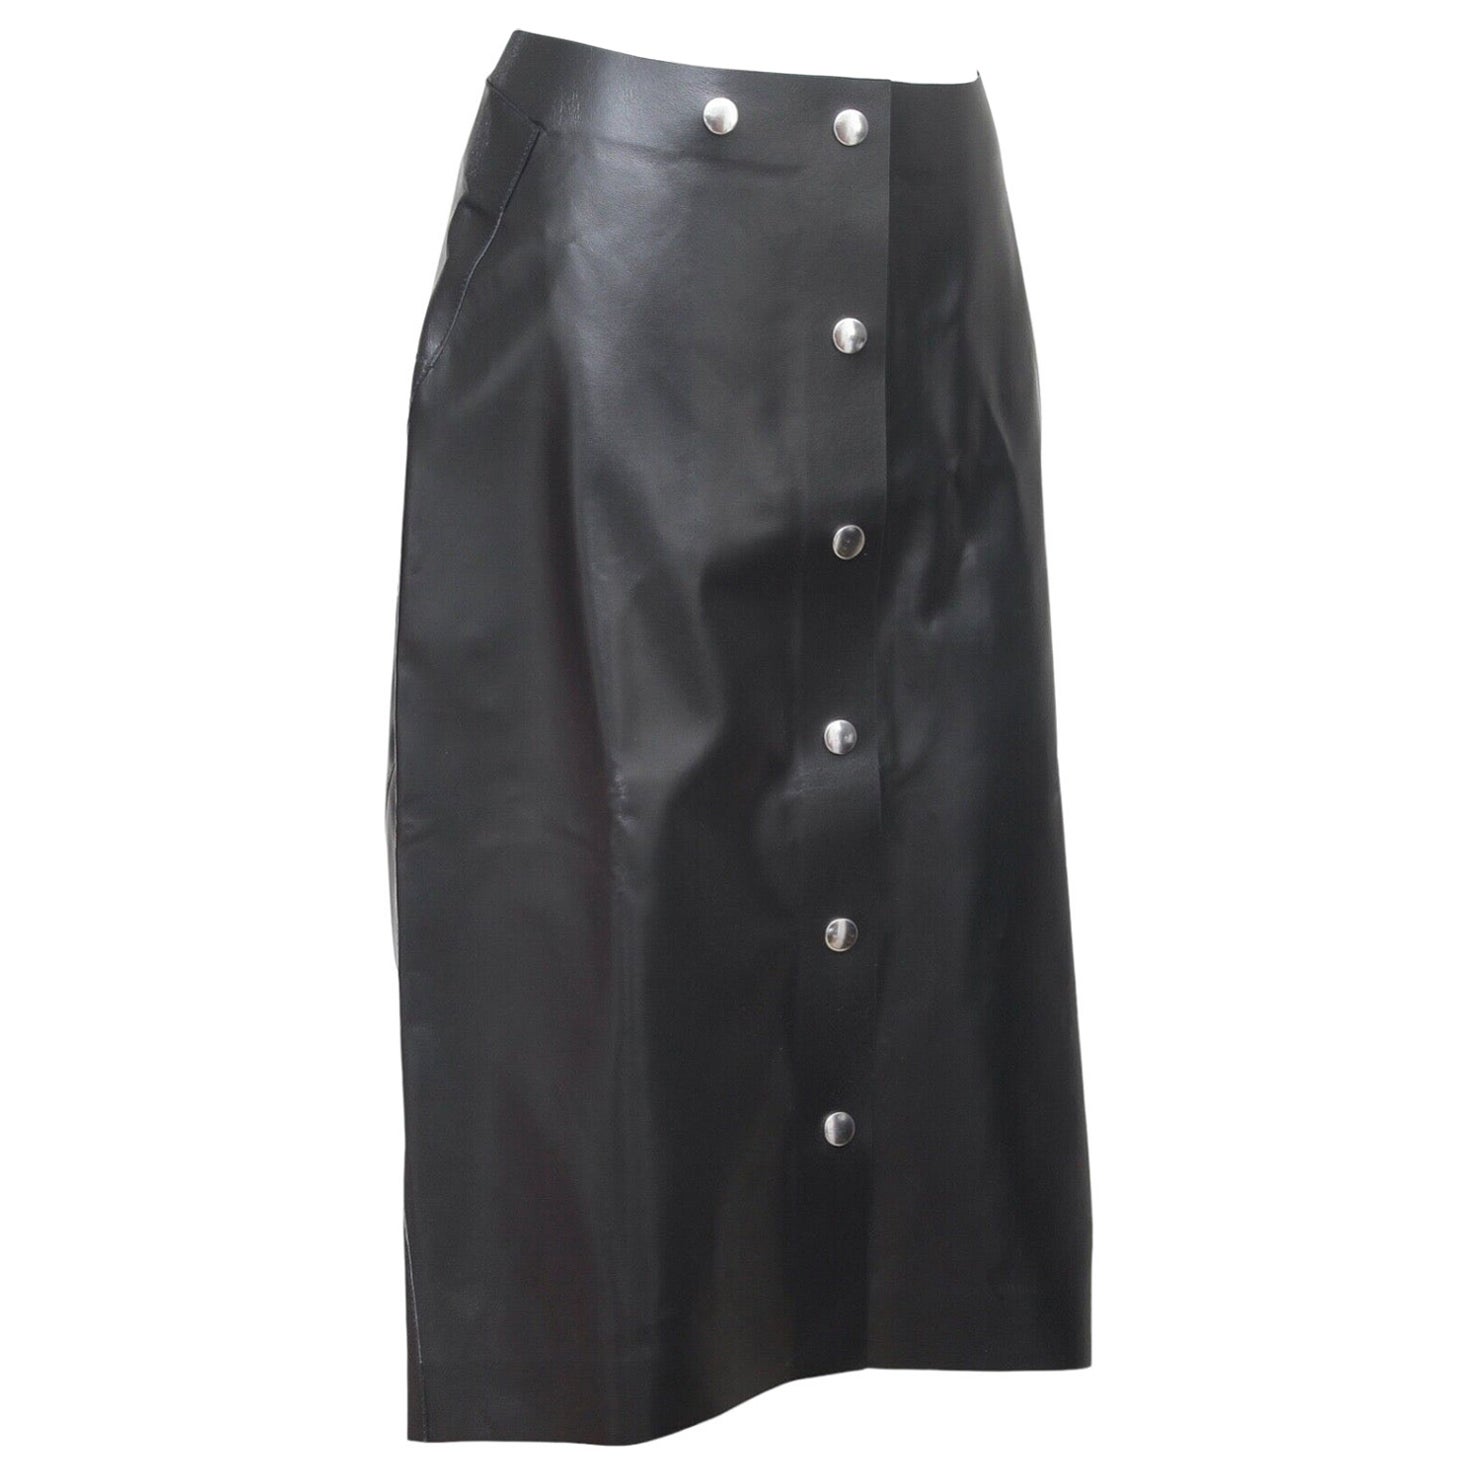 VICTORIA BECKHAM Black Leather Skirt Silver Tone Snaps Mid Length US 4 UK 8 BNWT For Sale